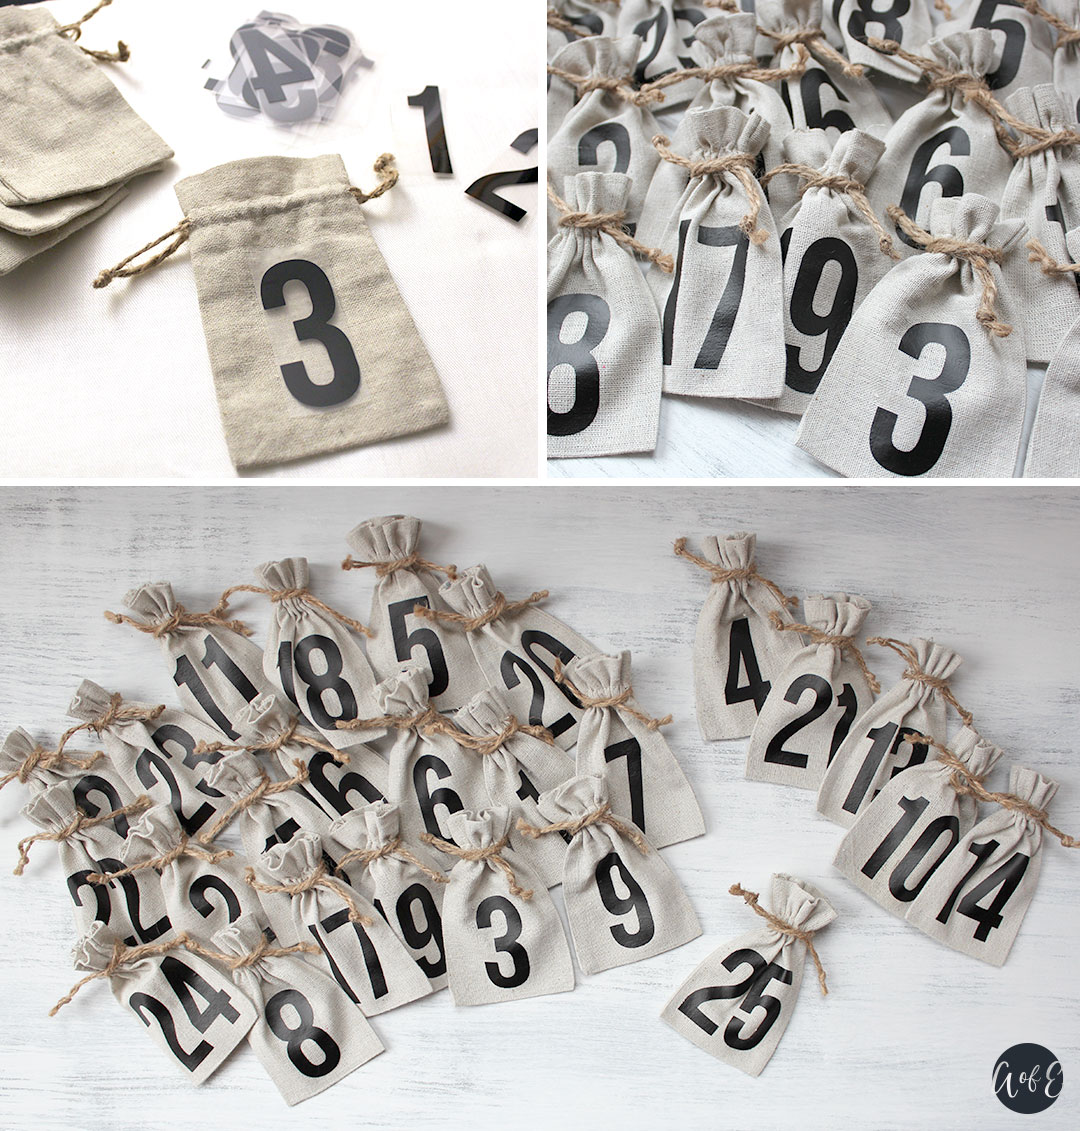 Step 6: Apply Numbers to Canvas Bags